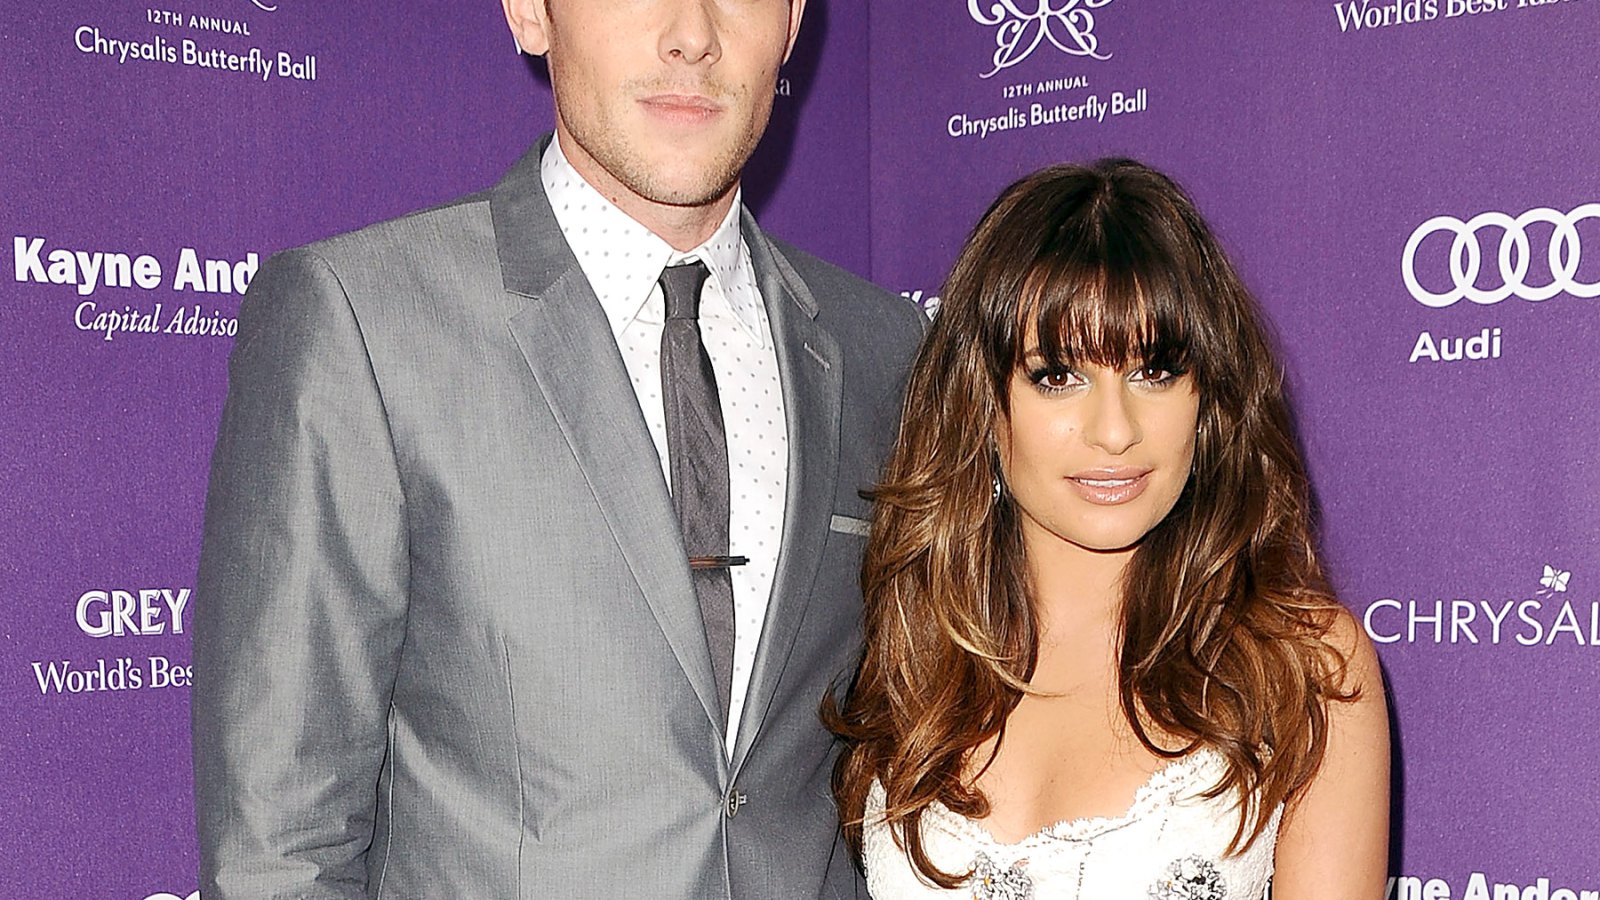 Cory Monteith and Lea Michele at the 12th Chrysalis Butterfly Ball